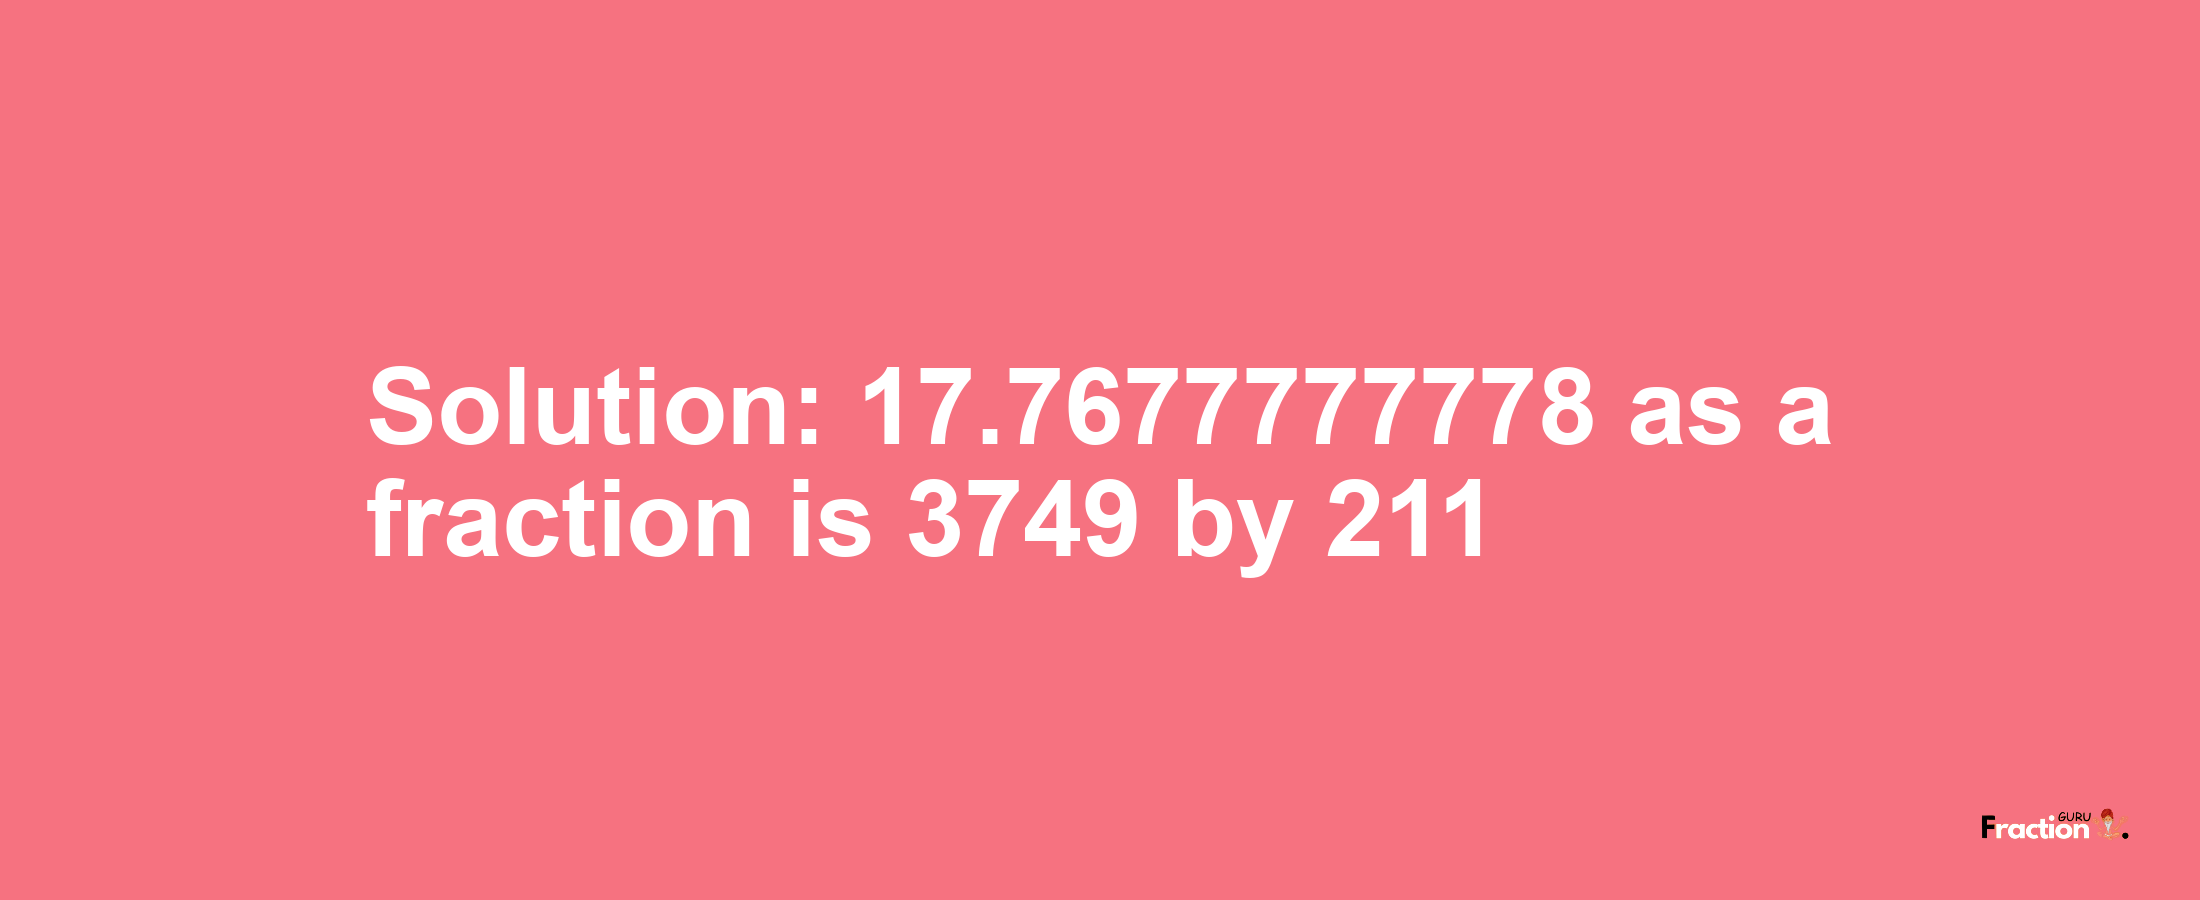 Solution:17.7677777778 as a fraction is 3749/211